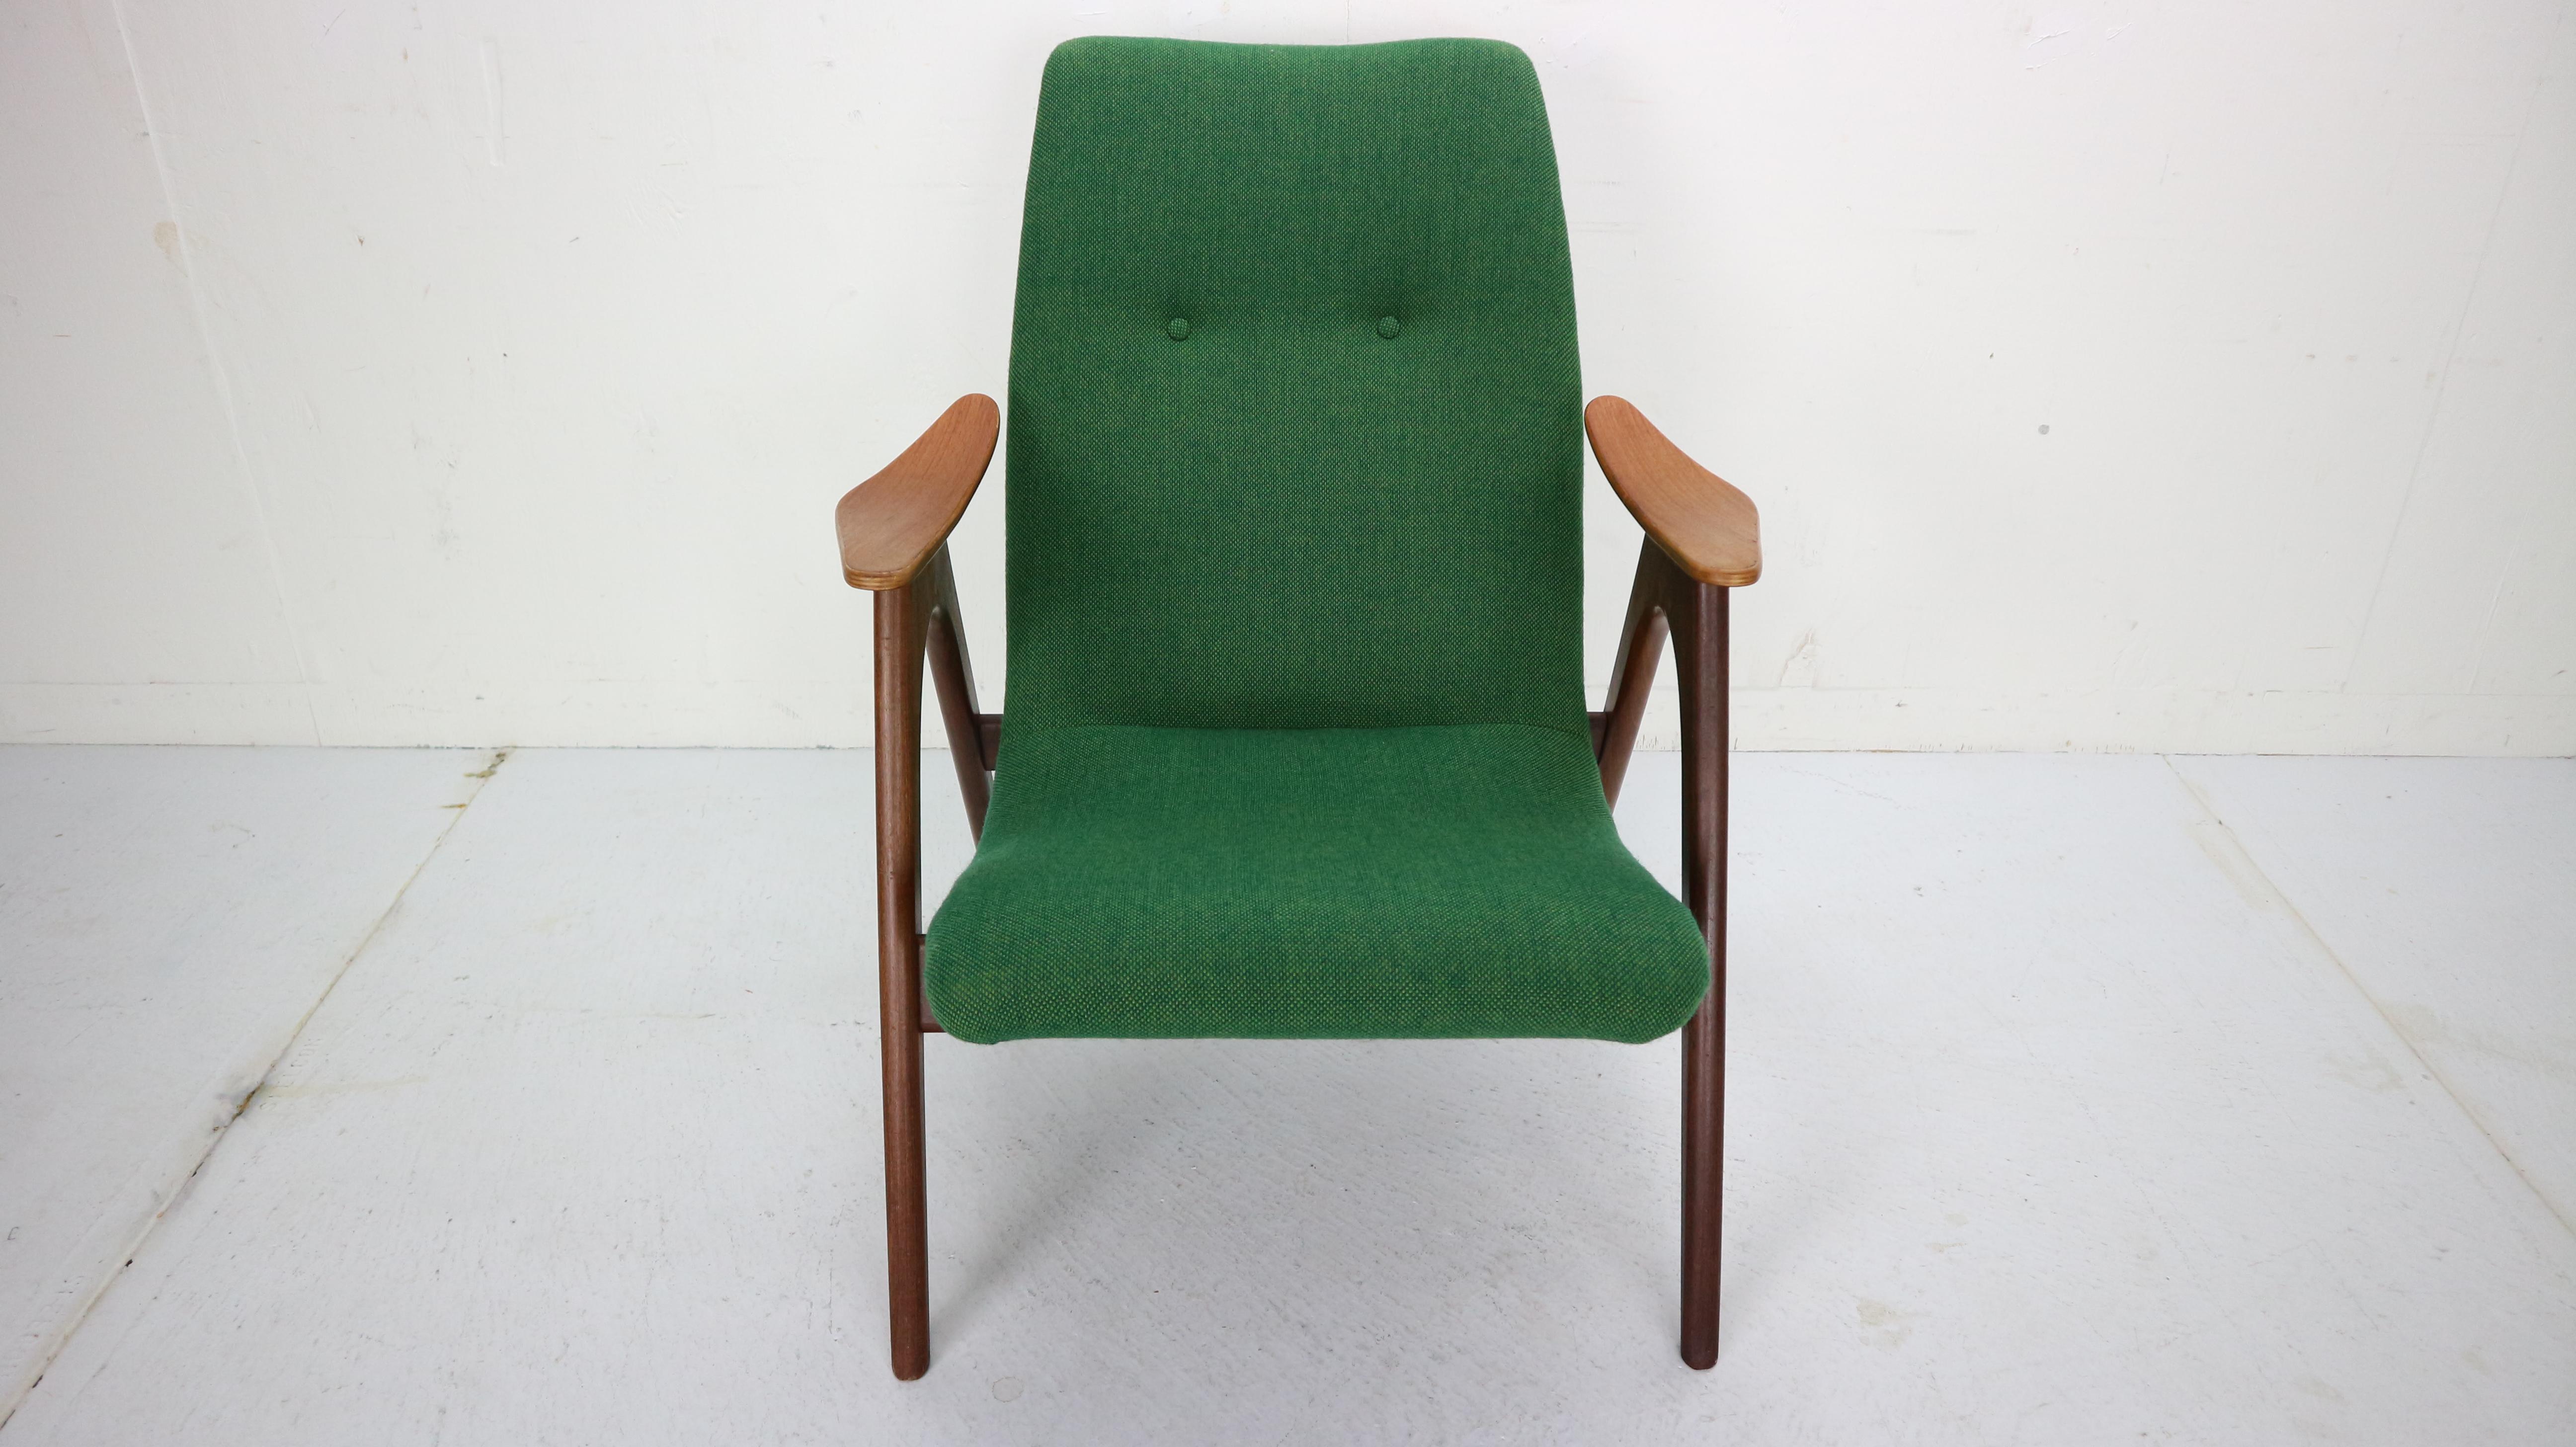 Beautiful designer lounge chair with a frame of solid teak wood and newly upholstered seat with green furniture fabric. The organic design of the chair looks very Danish, but comes from the Netherlands. The armchair is designed by the Dutch designer